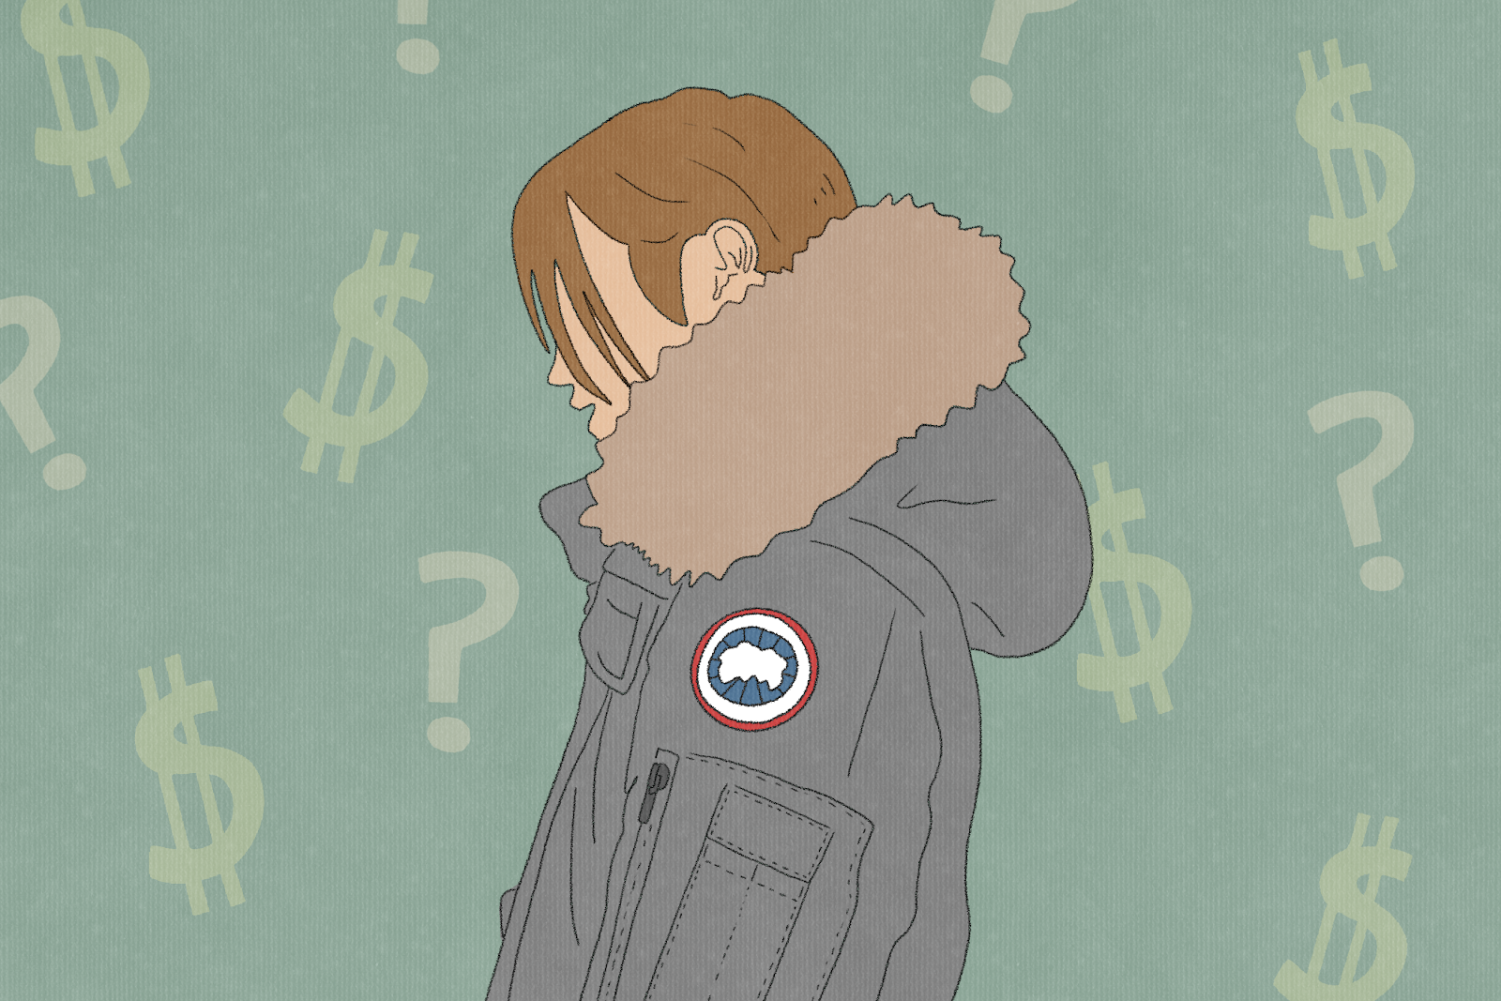 A+drawing+of+someone+wears+a+winter+coat+with+a+white+and+red+logo+on+the+sleeve.+They+stand+in+front+of+a+green+background+accented+with+question+marks+and+dollar+signs.